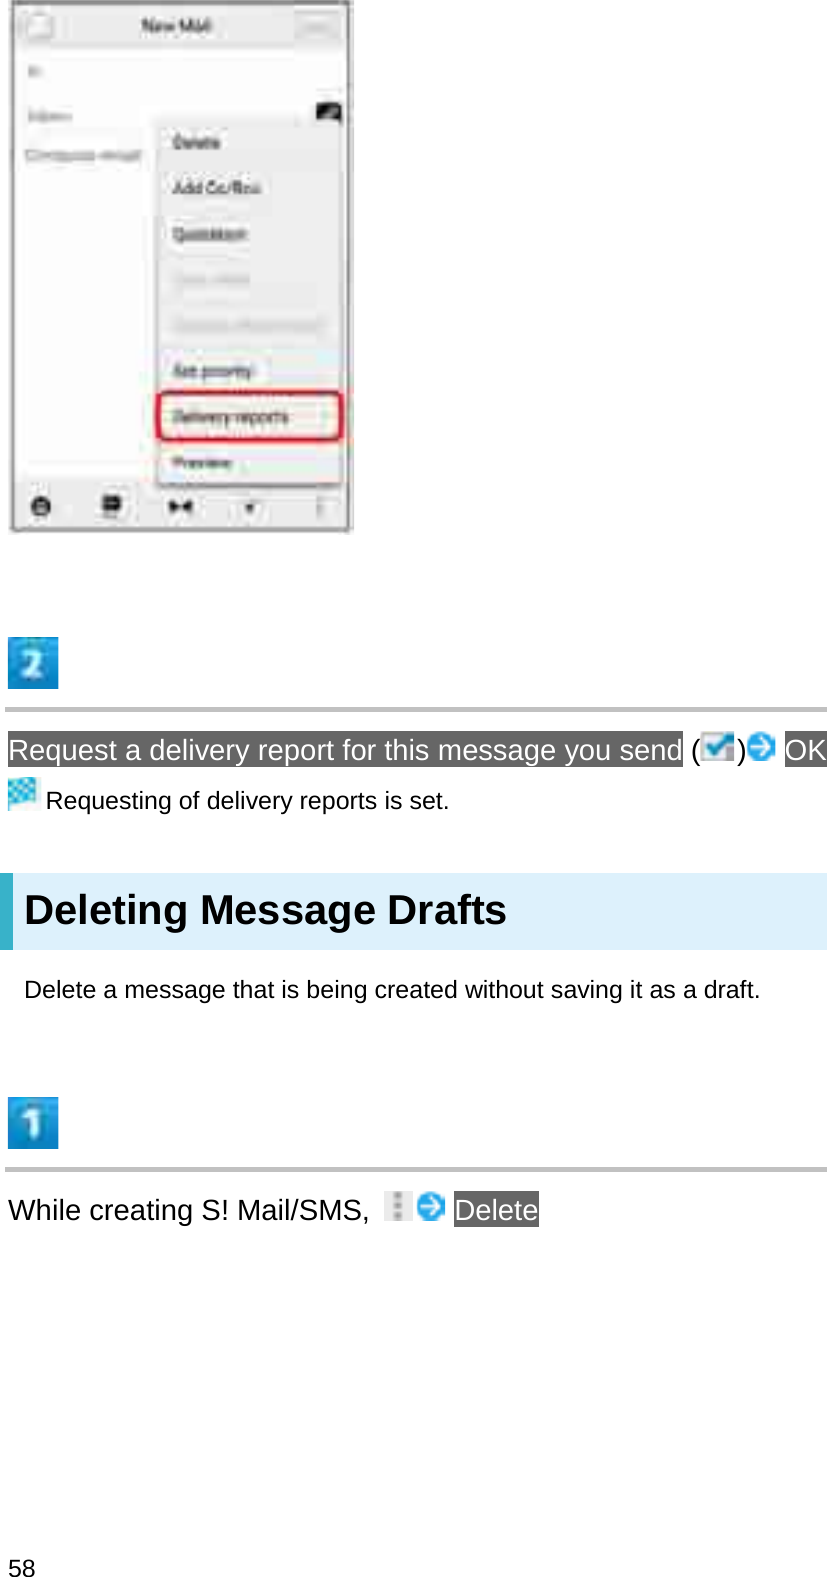 Request a delivery report for this message you send ( ) OKRequesting of delivery reports is set.Deleting Message DraftsDelete a message that is being created without saving it as a draft.While creating S! Mail/SMS,  Delete58